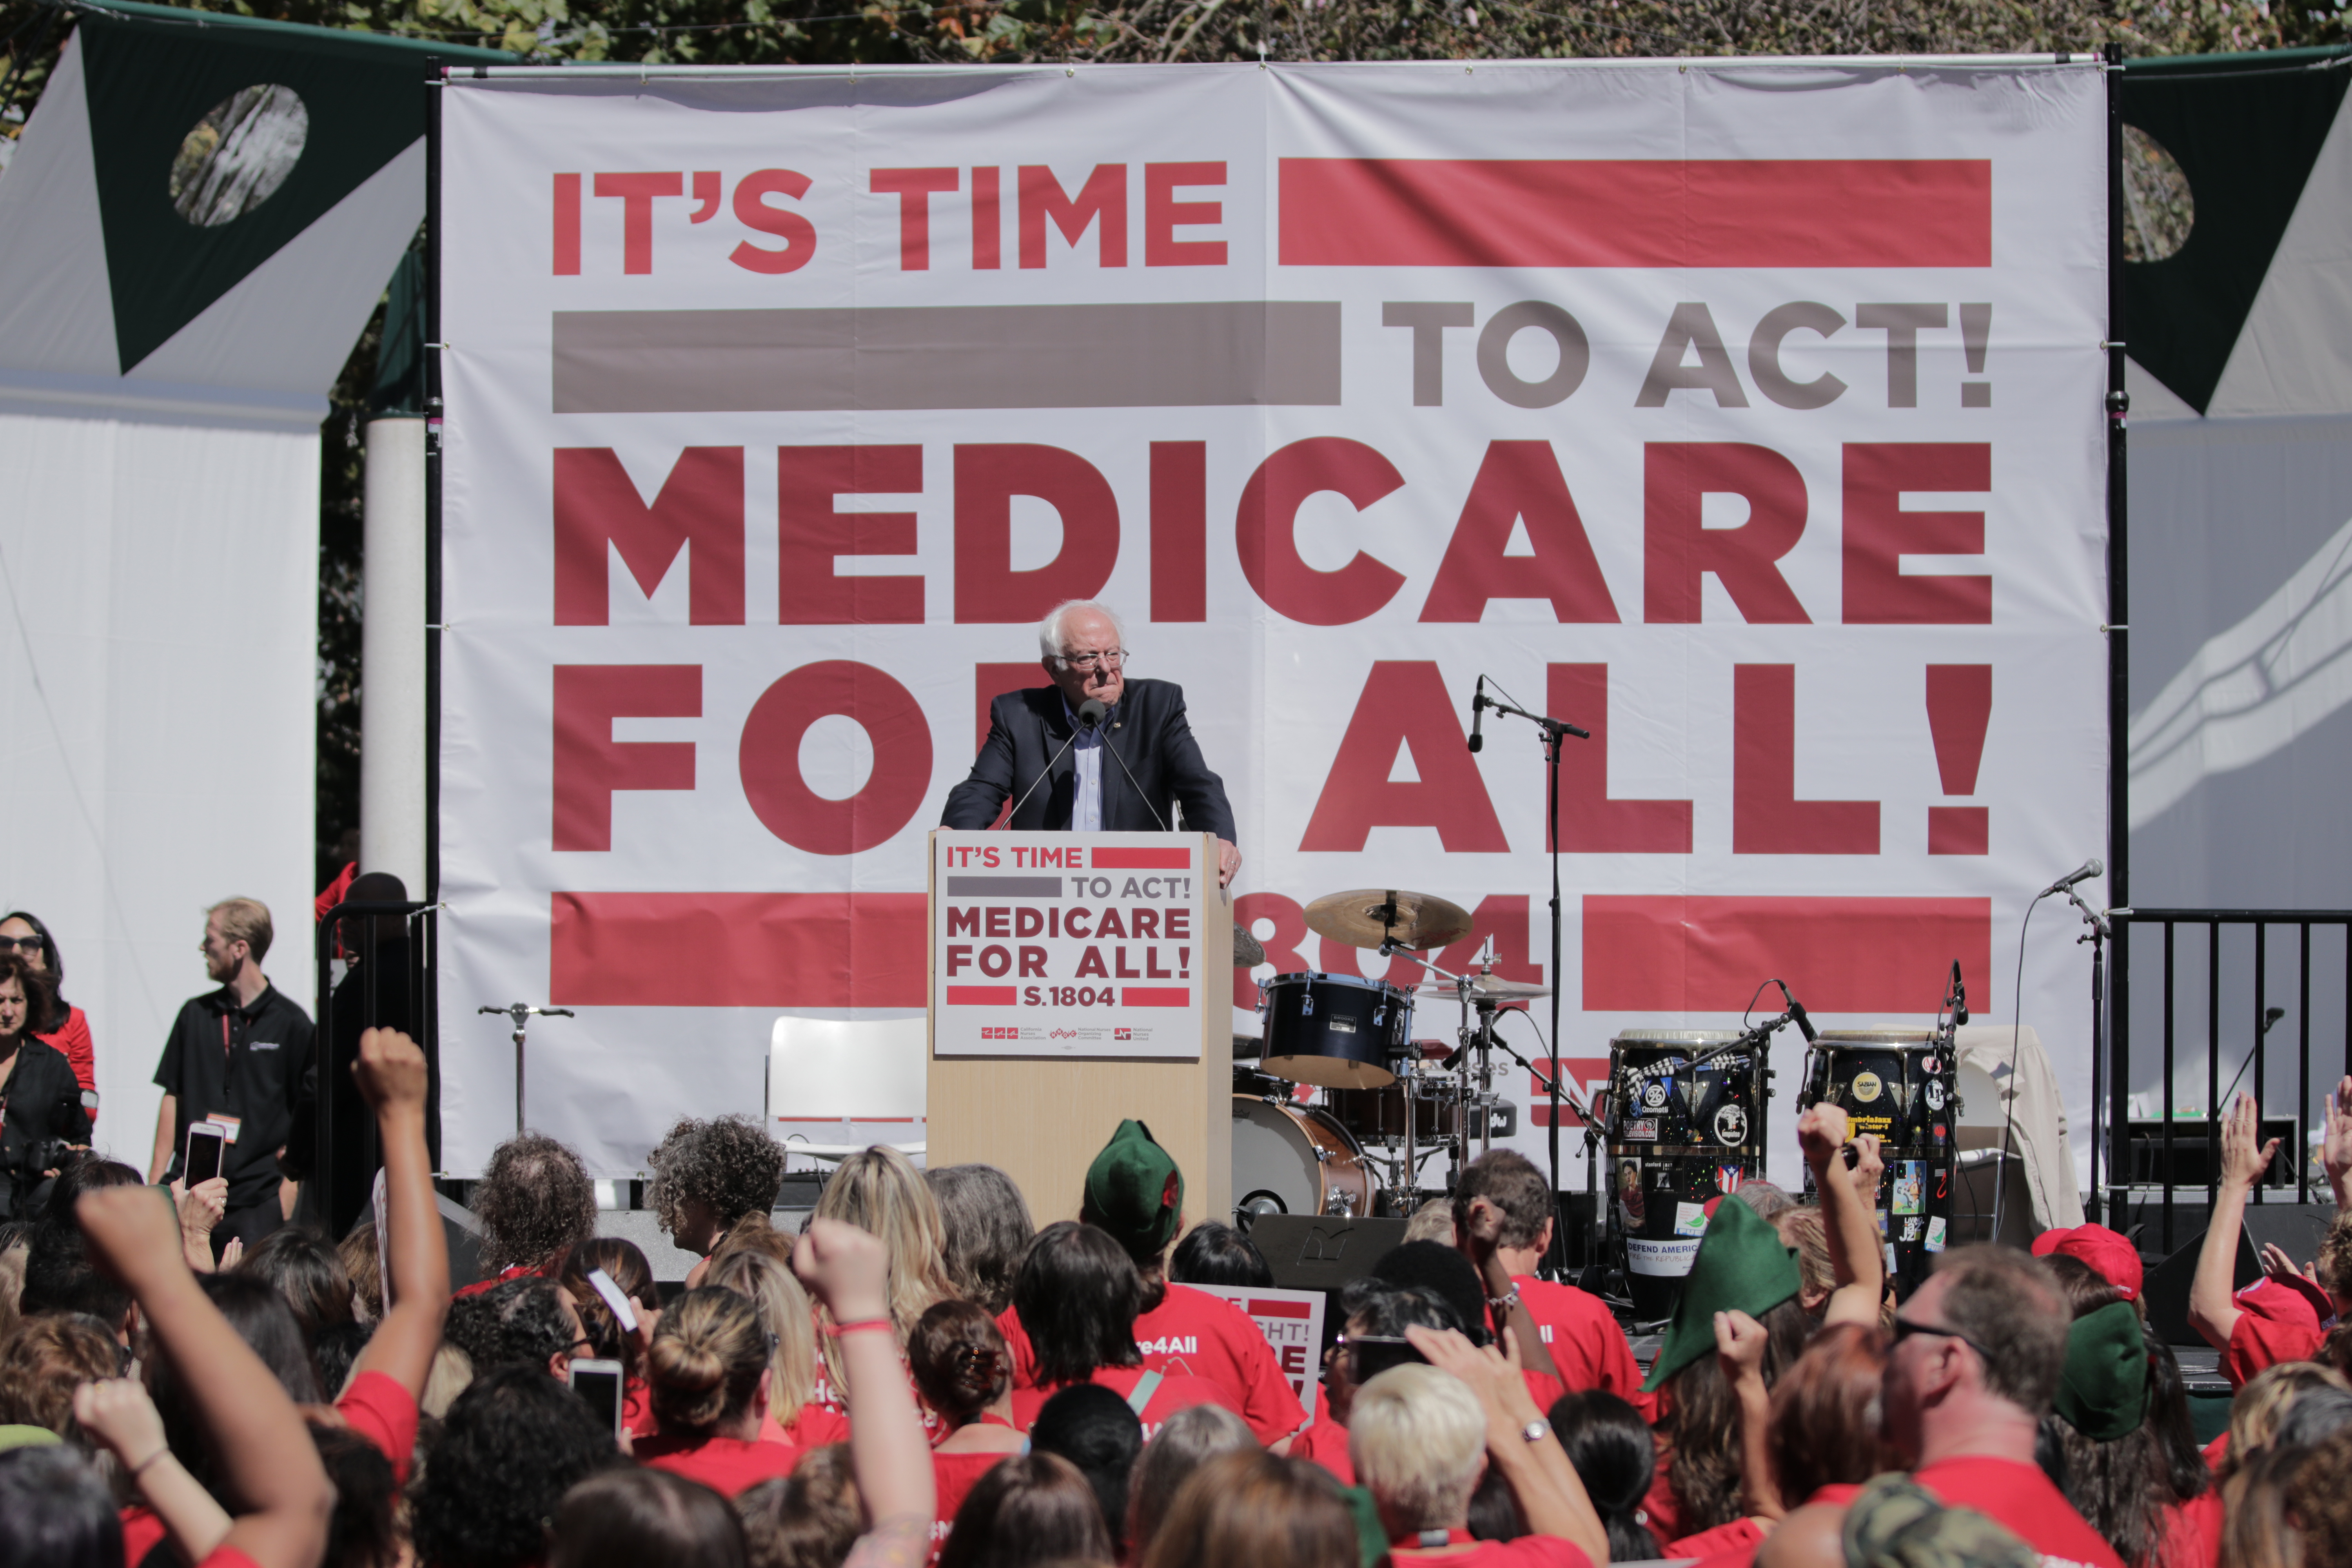 The pandemic proves we need single payer, Medicare for All